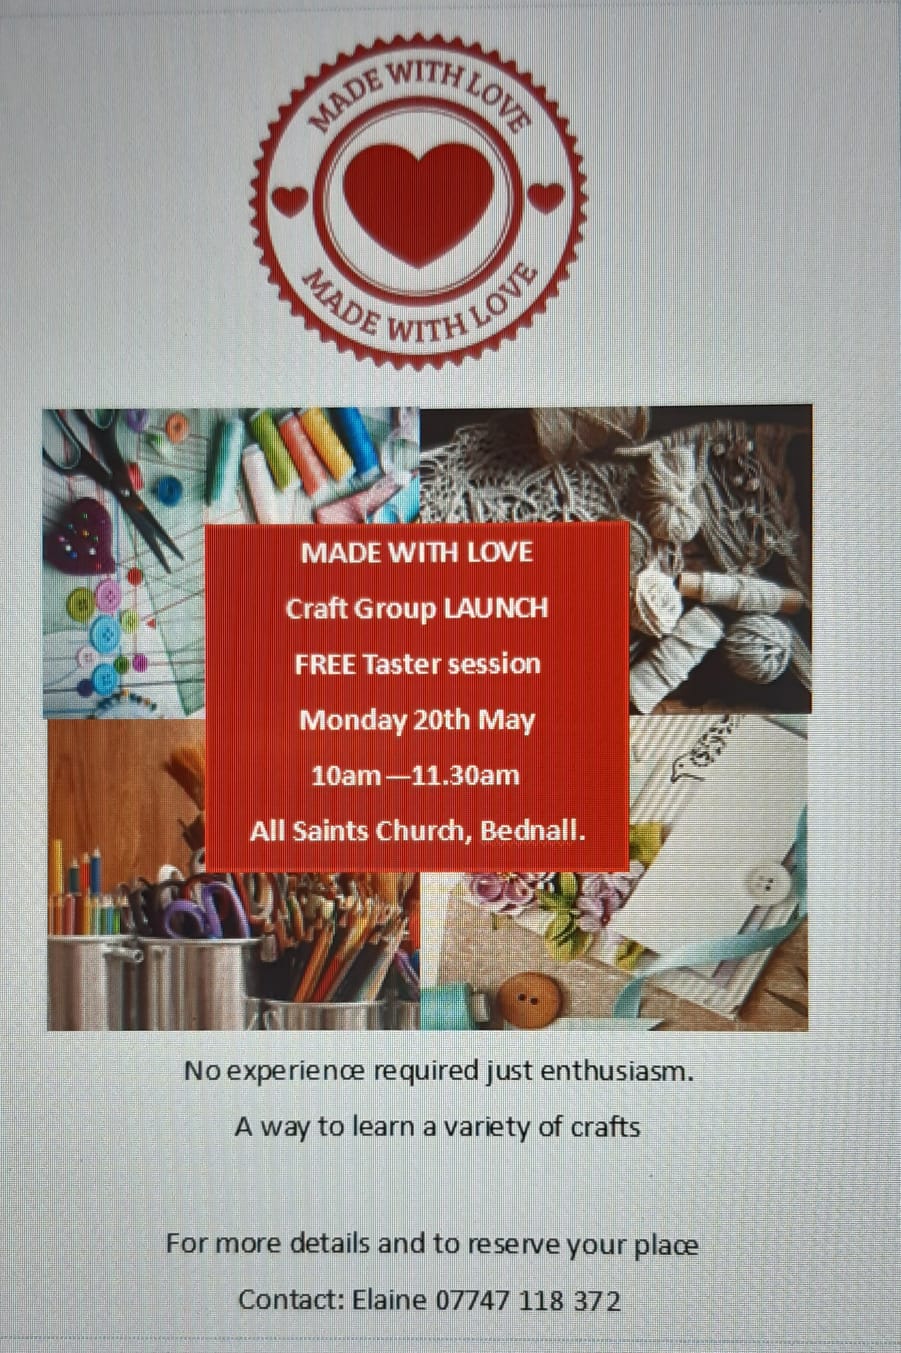 New Craft Group – First meeting 20th May in Bednall